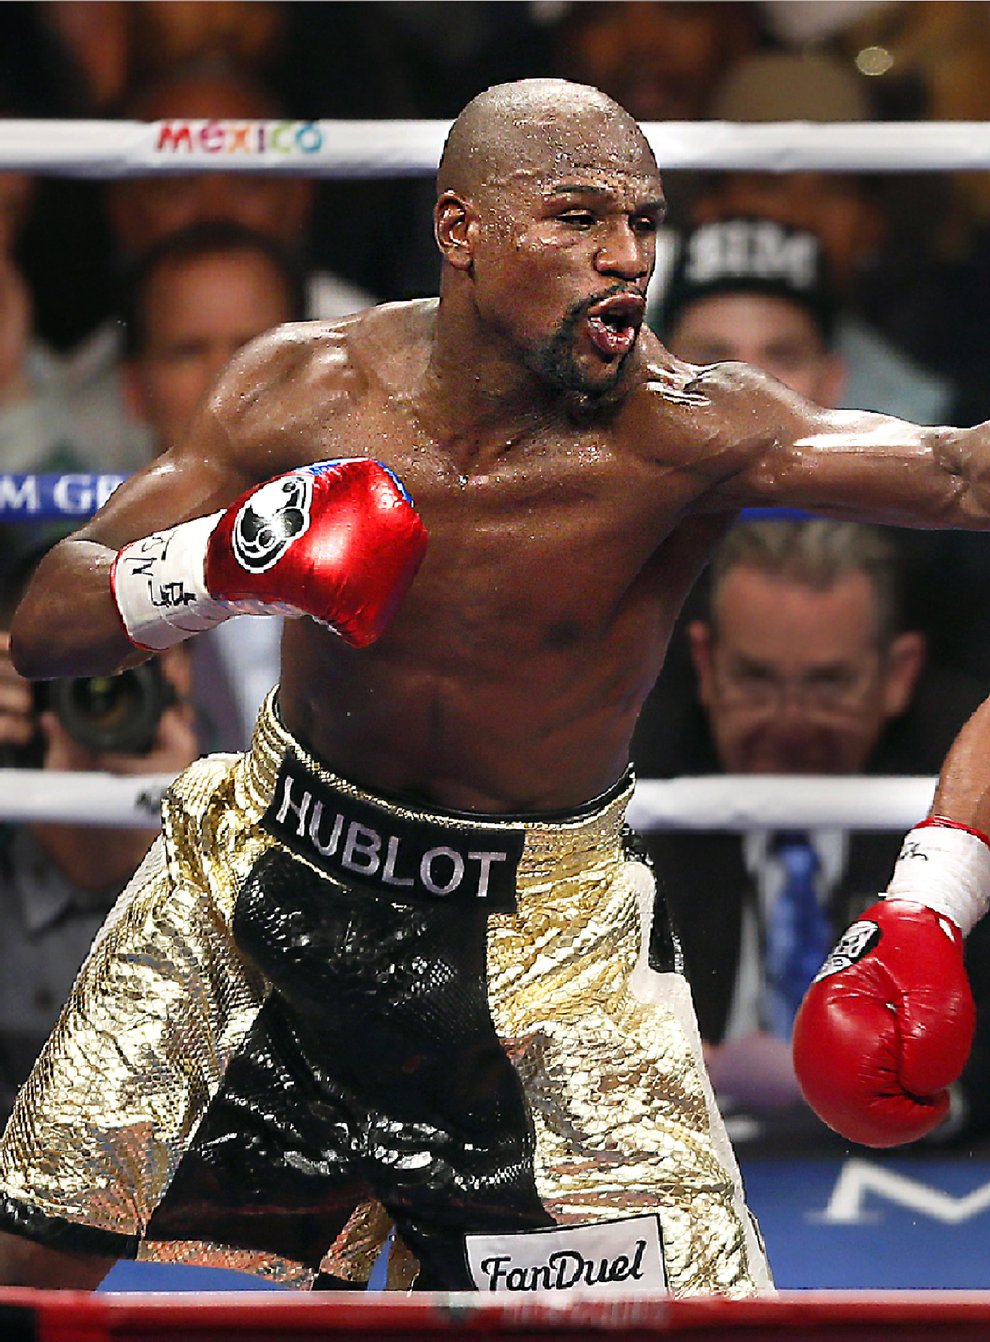 Mayweather beat Pacquiao by unanimous decision five years ago